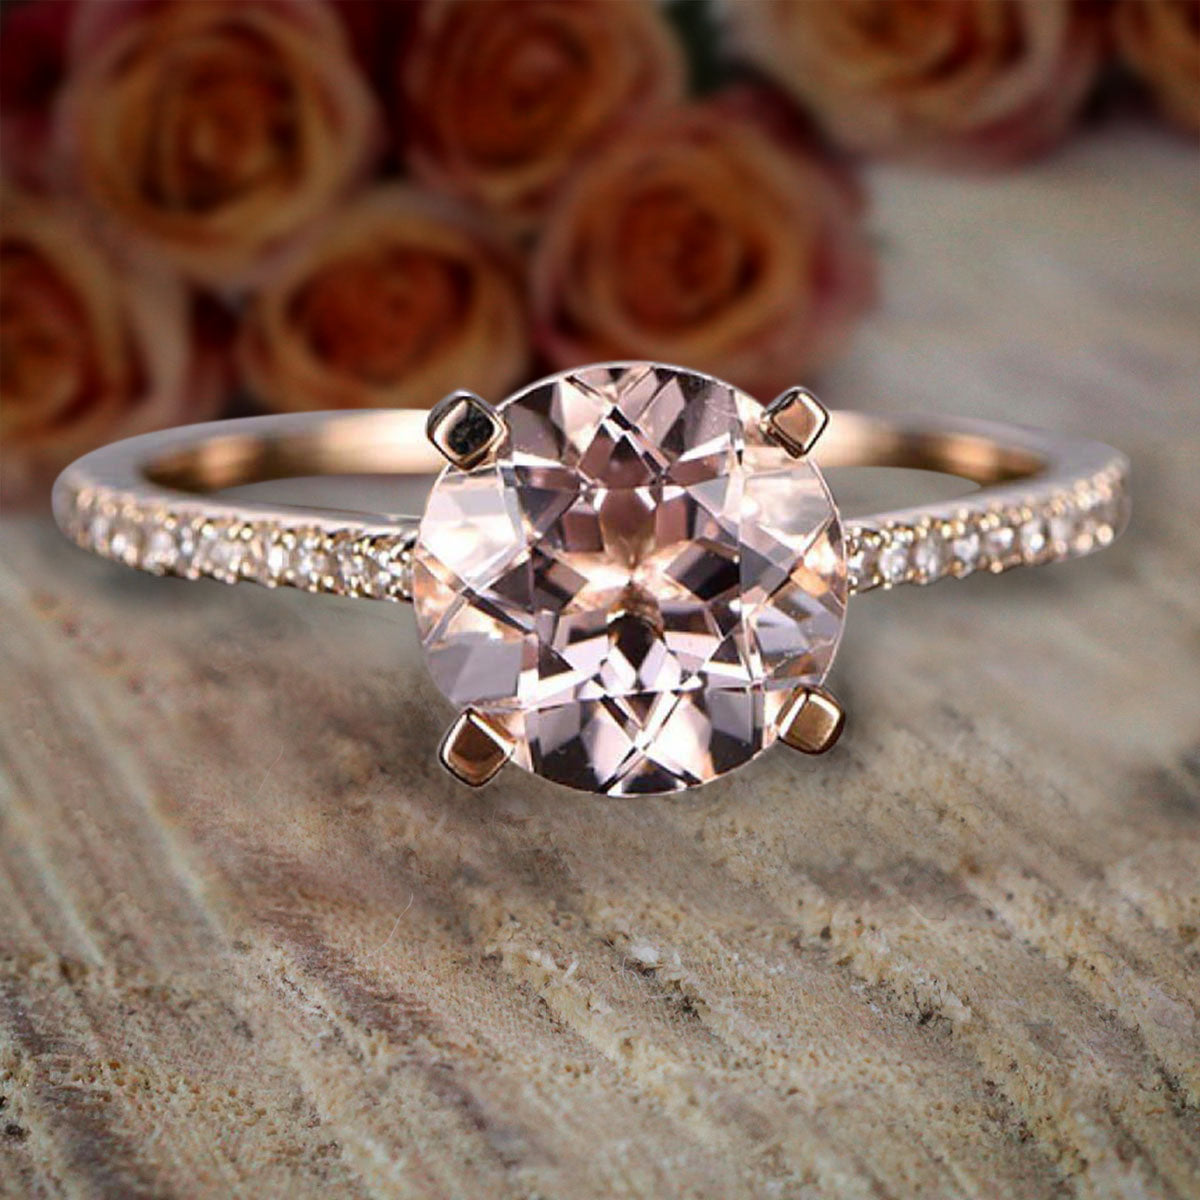 Buy Morganite Engagement Ring Online In India - Etsy India